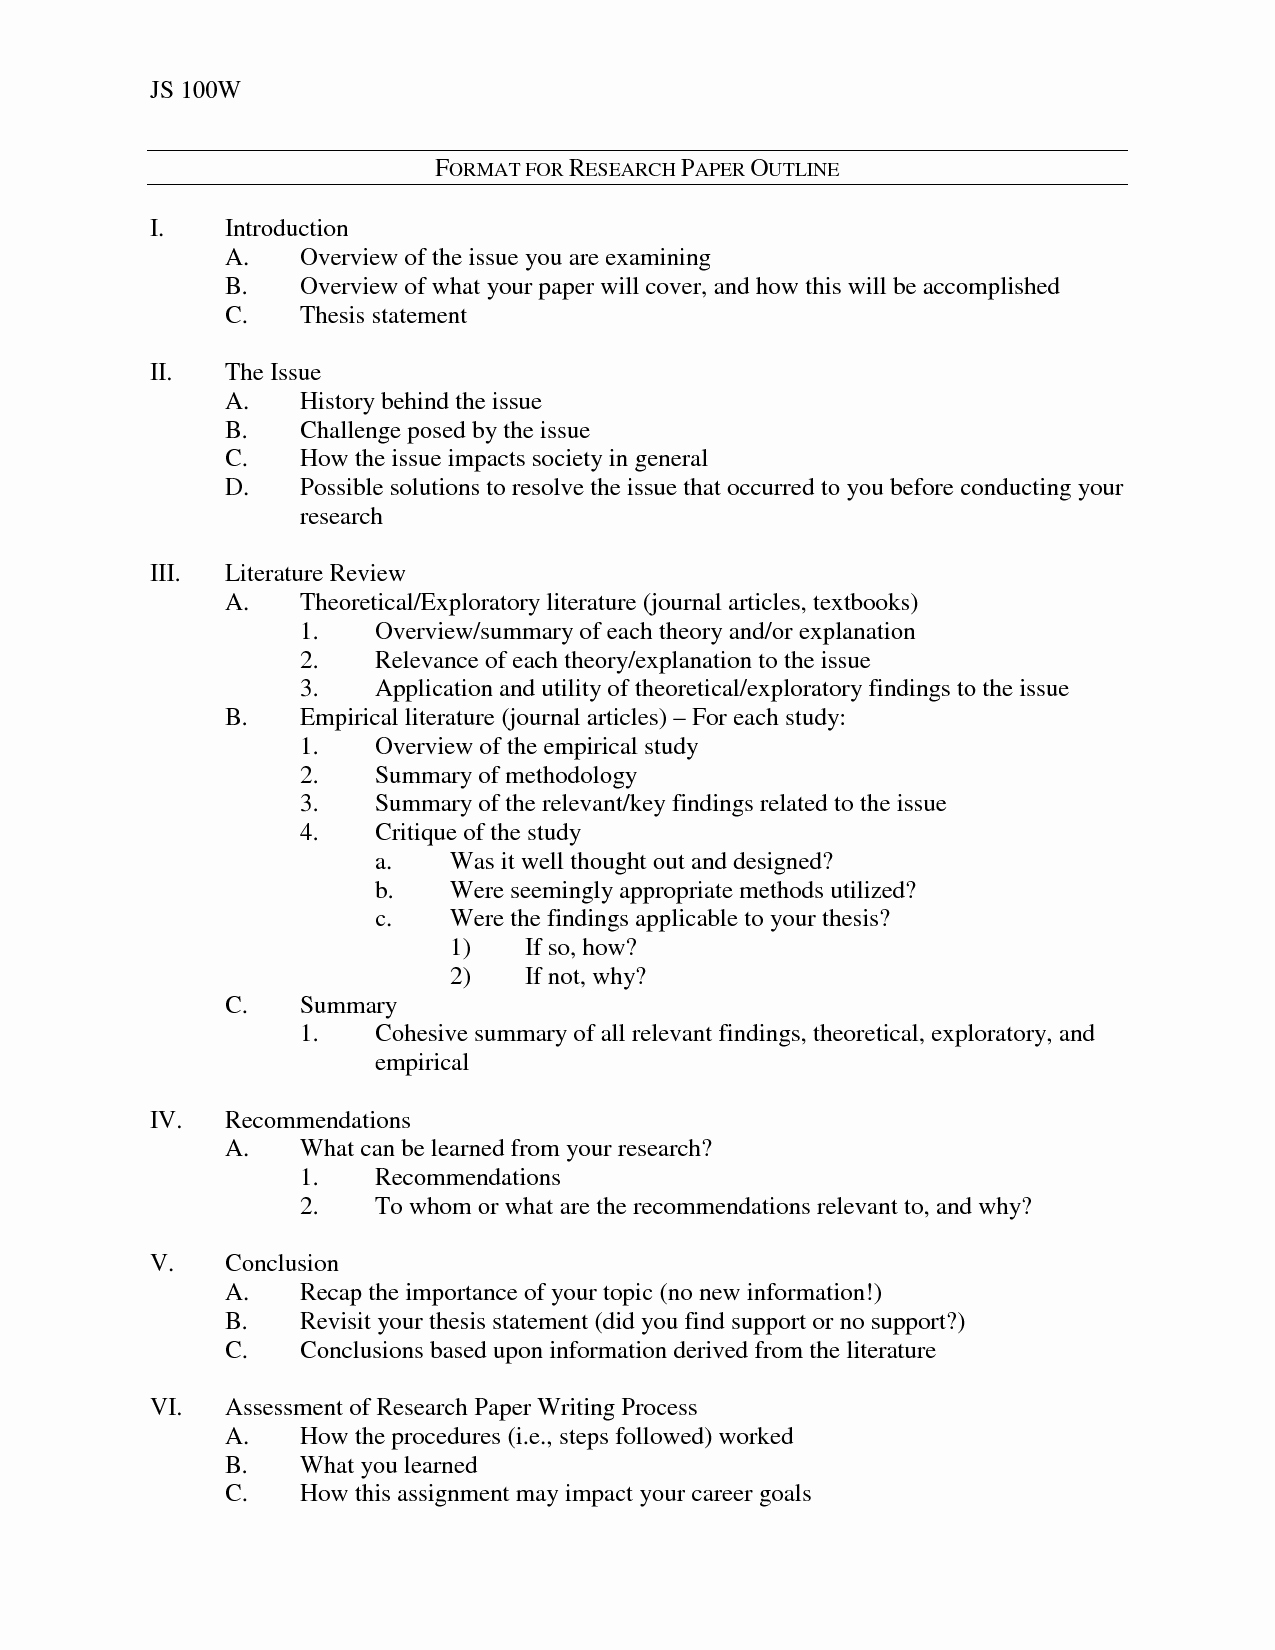 Sample Outlines for Research Papers Awesome Research Paper Outline format by Vvg 93p8publ